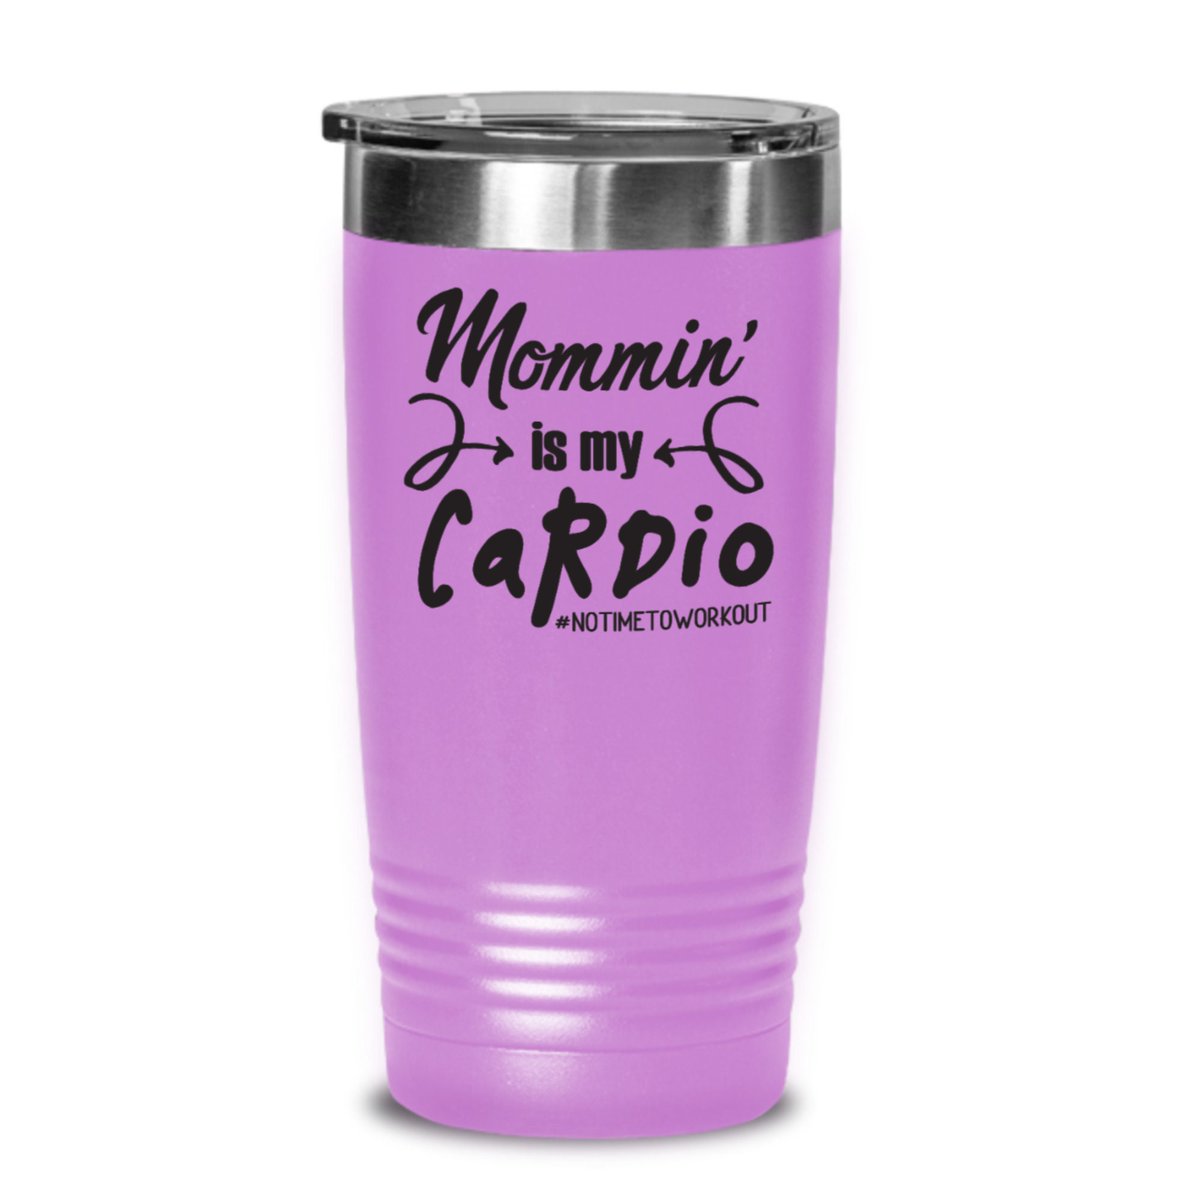 Excited to share the latest addition to my #etsy shop: Mom Life tumbler, Funny Ice Coffee Tumbler, Gift for Mom, Insulated Beach, Tumbler for Women, etsy.me/3cM0clJ #metal #momlifetumbler #mothersdaytumbler #momtravelmug #momgifts #funnytumbler #tumblerforwomen